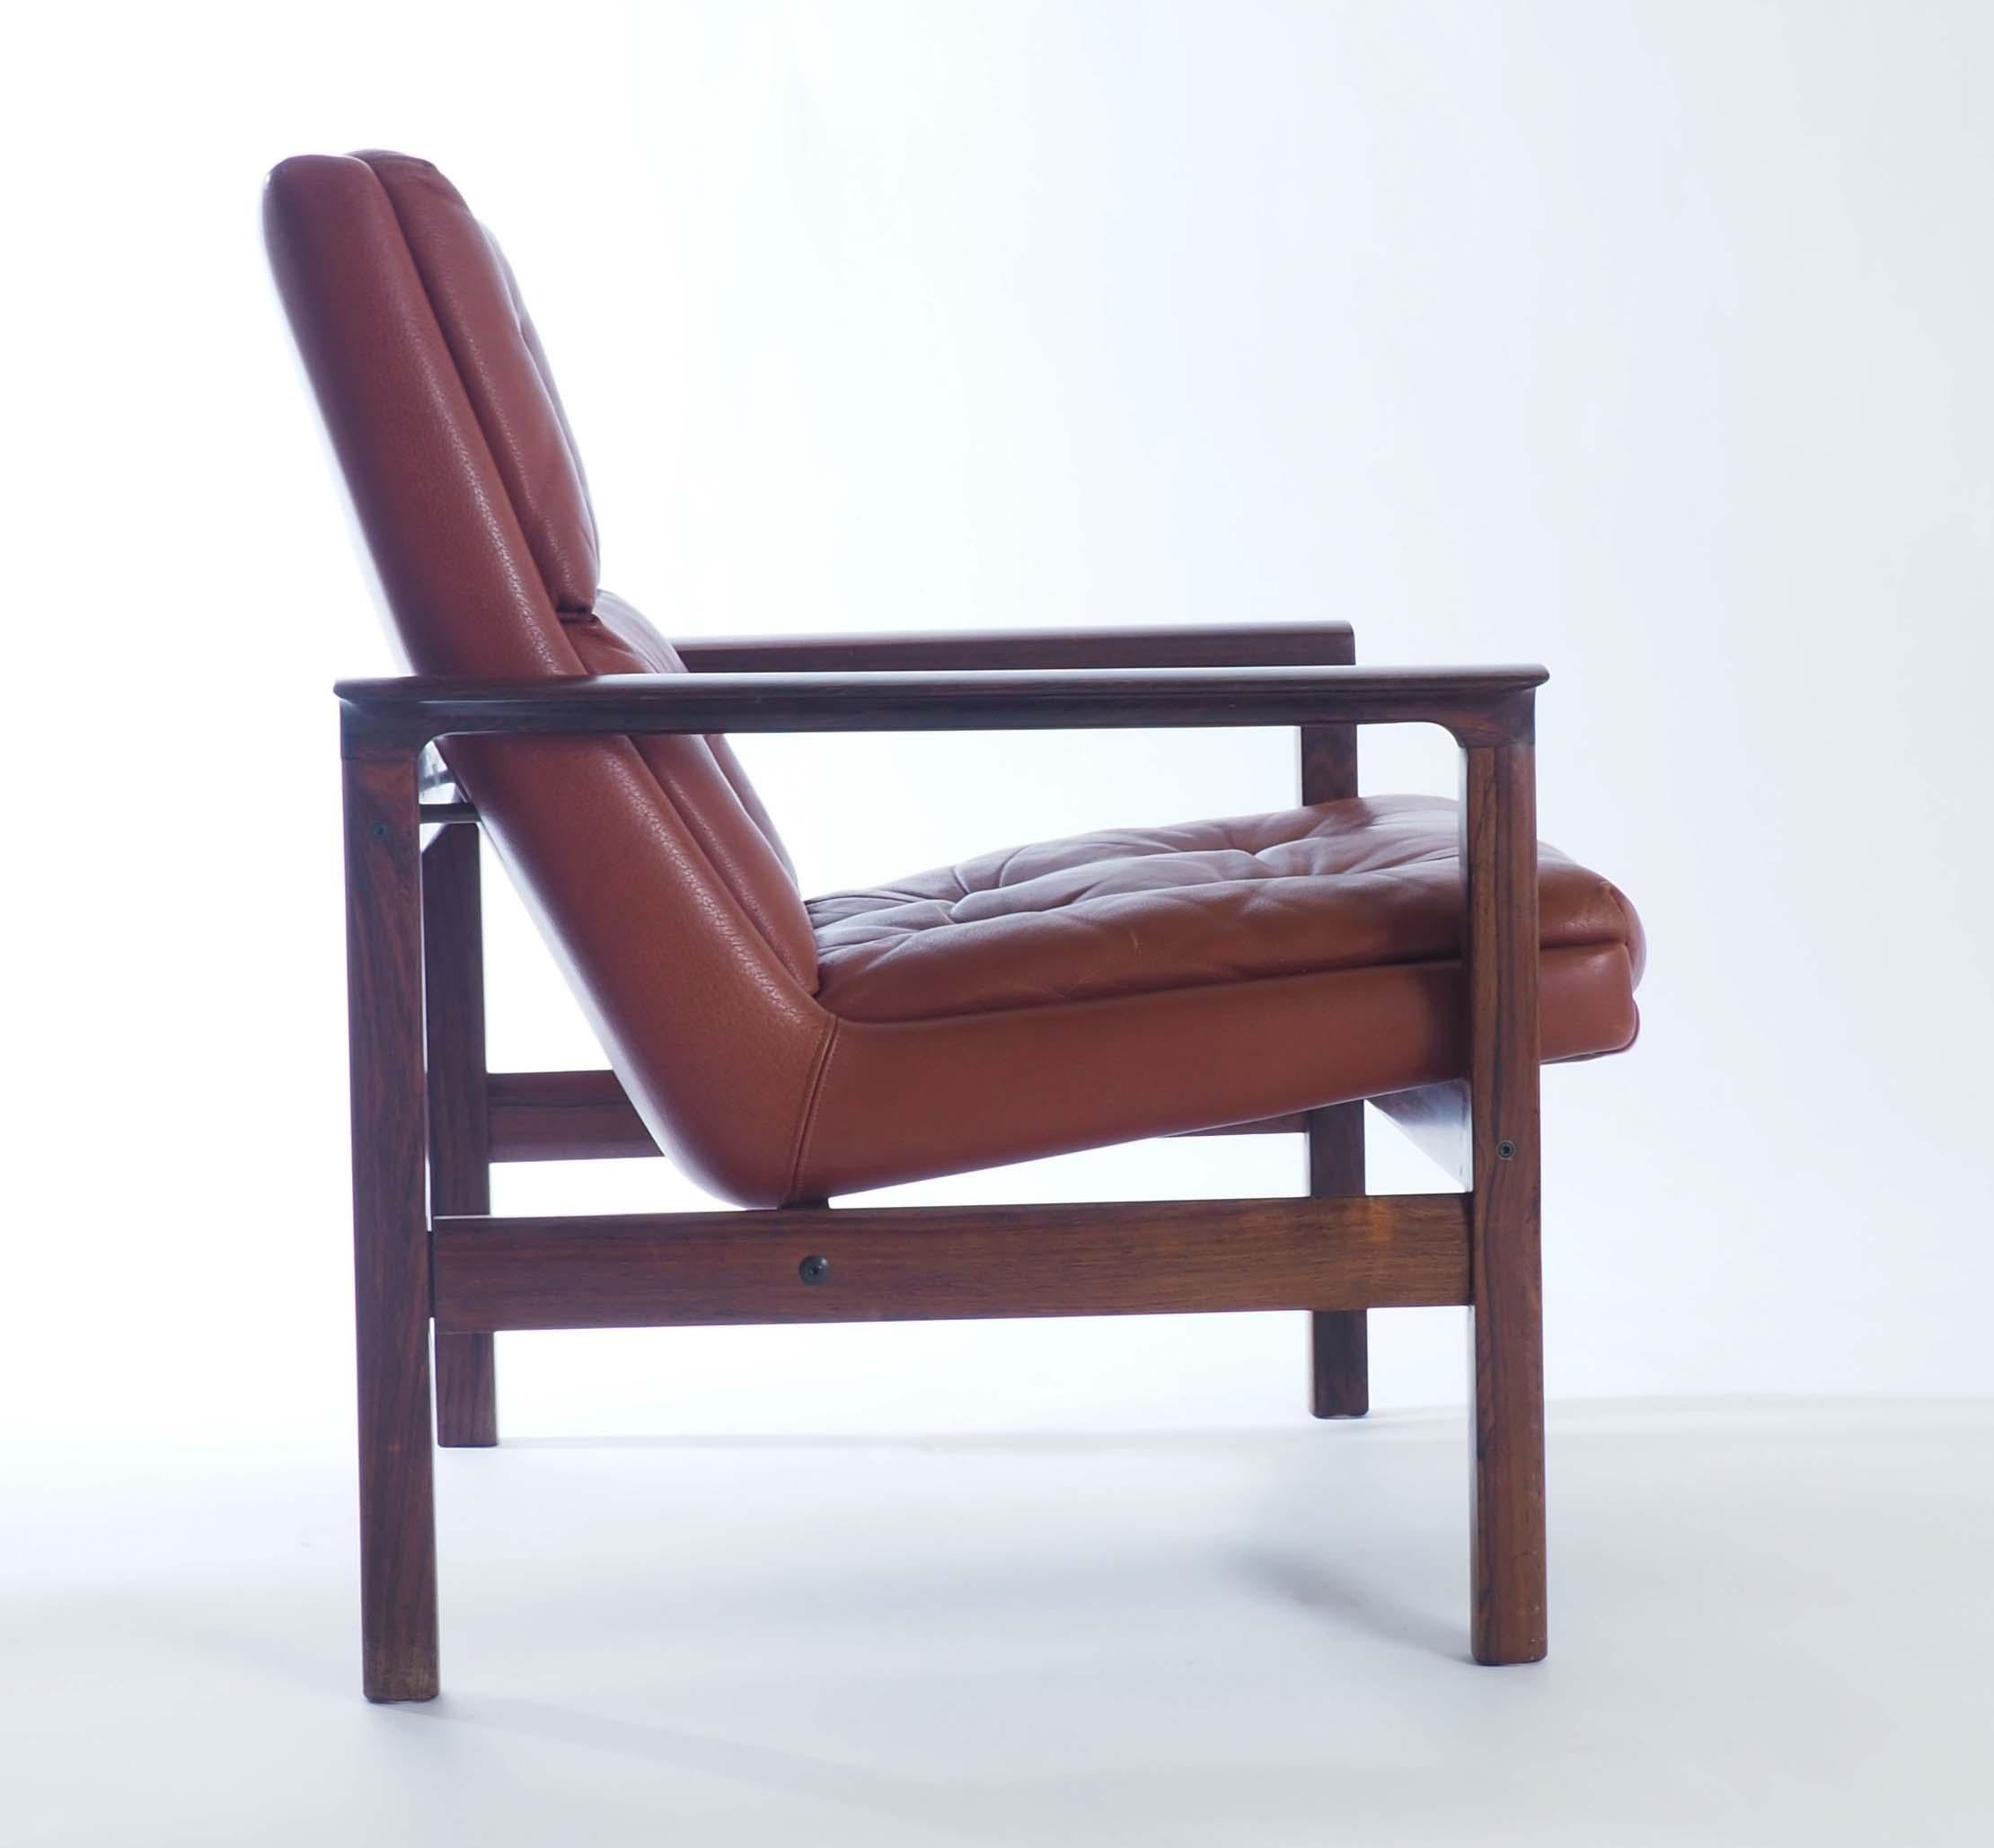 Scandinavian Modern Lounge Chair in Rosewood and Leather by Fredrik Kayser, Norway